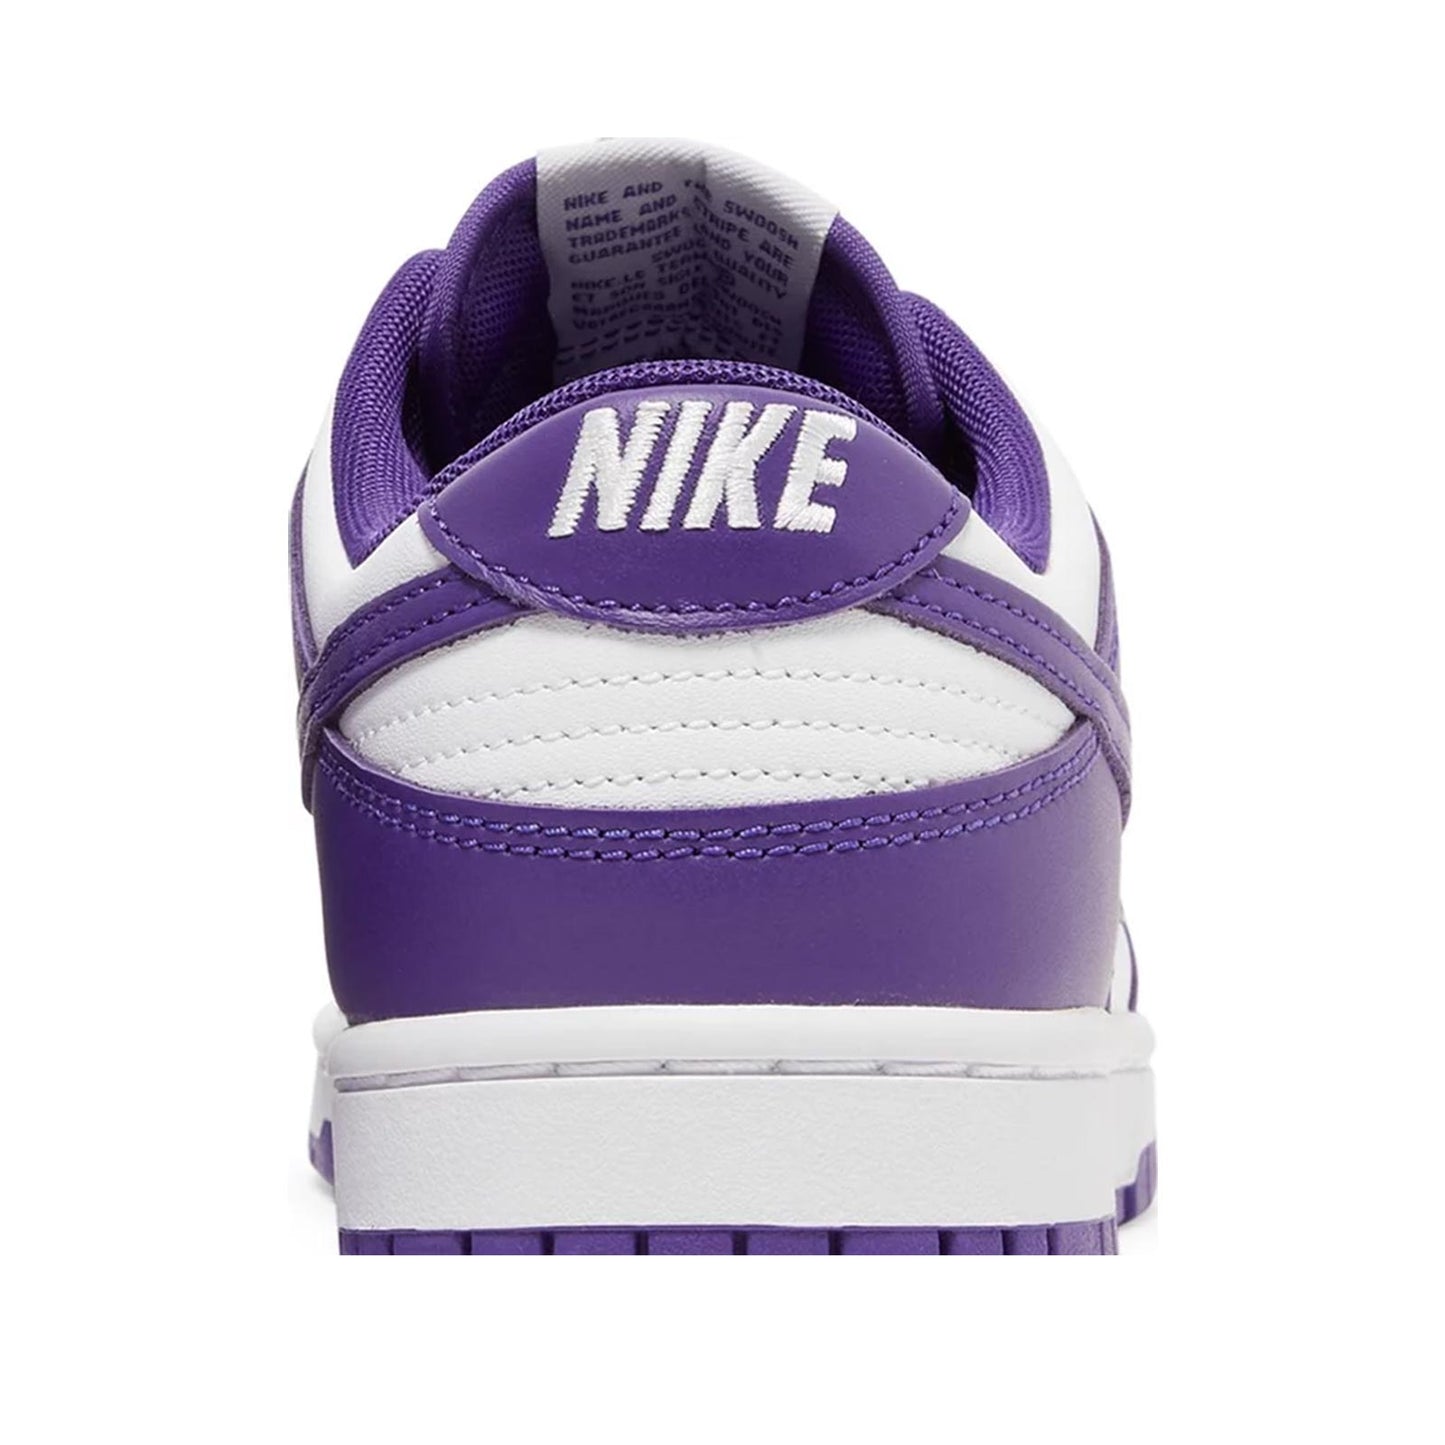 nike air maxim flower care instructions free